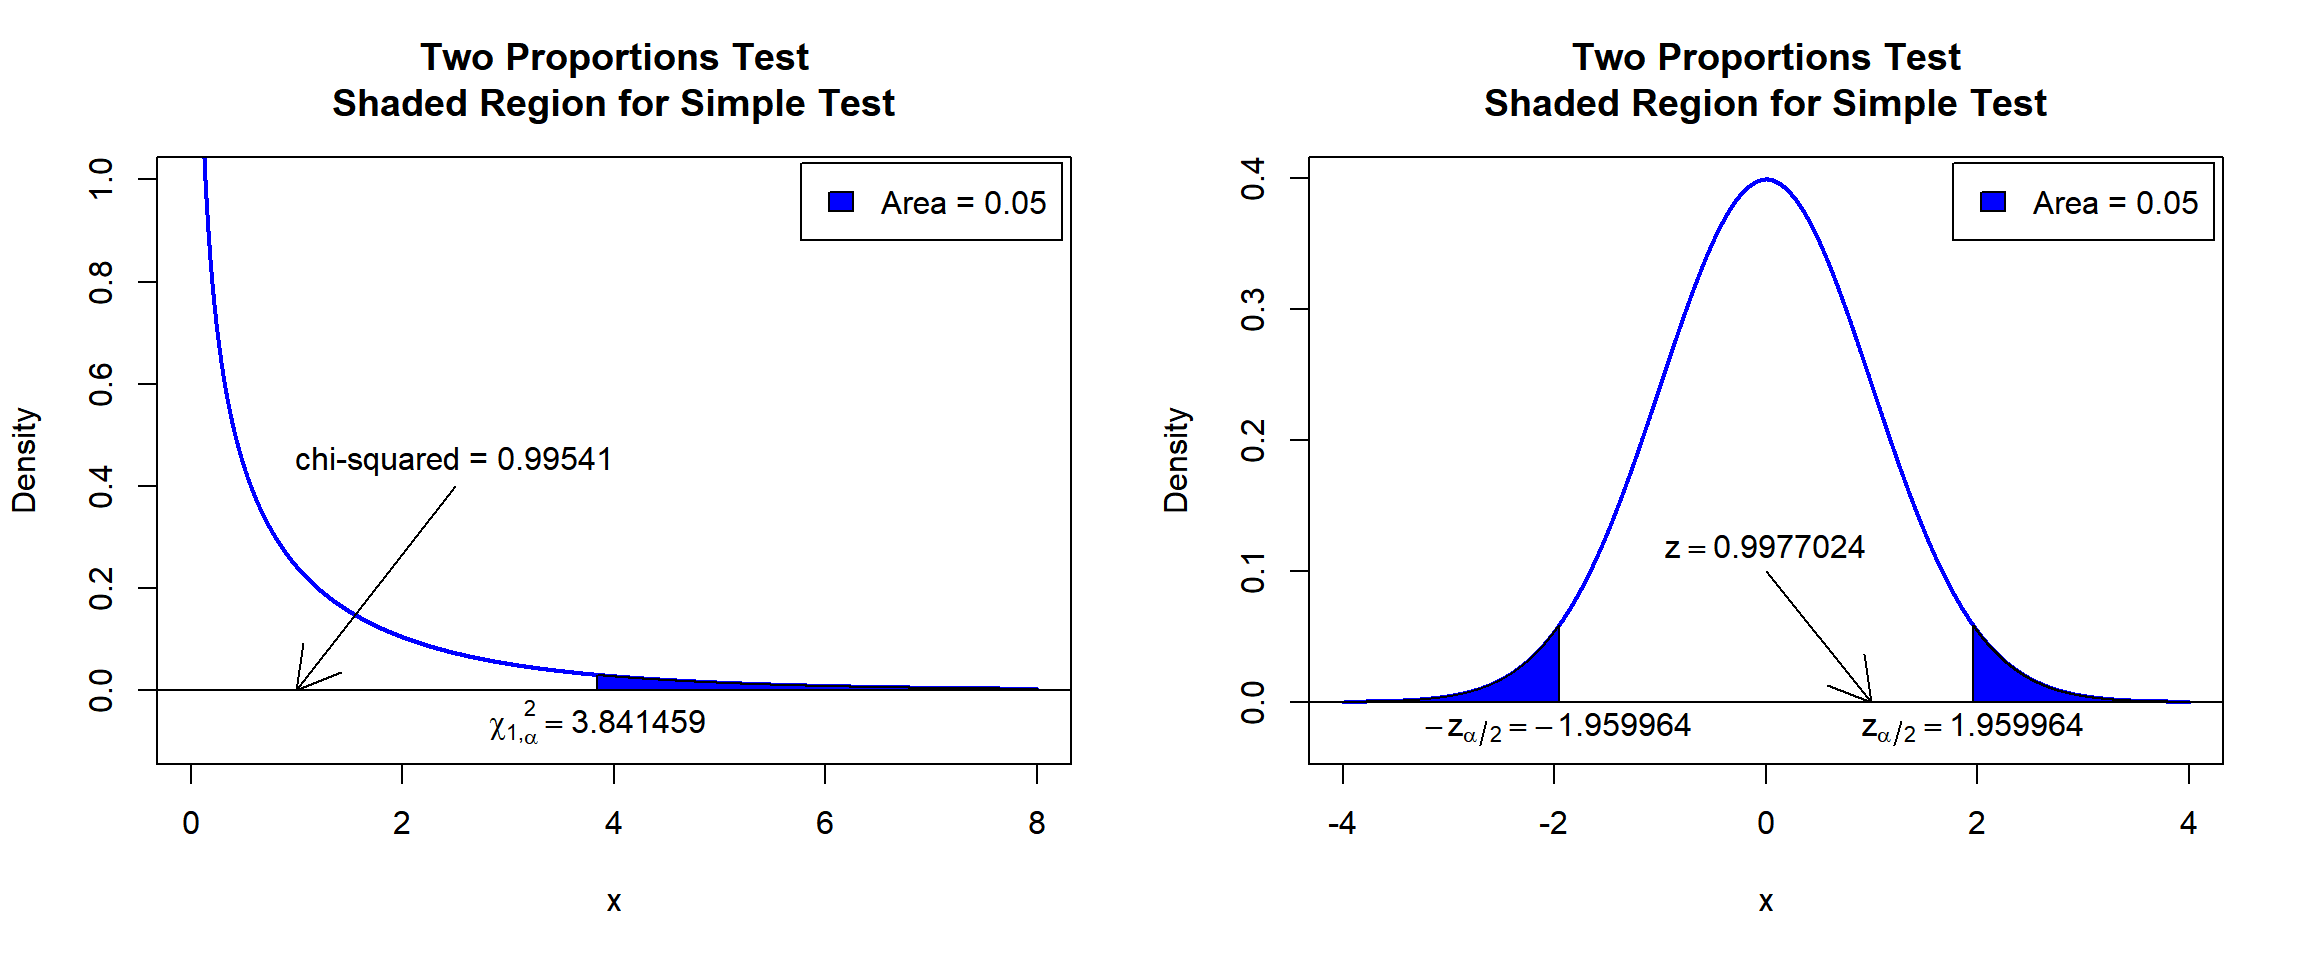 Two Proportions Test Shaded Region for Simple Test in R